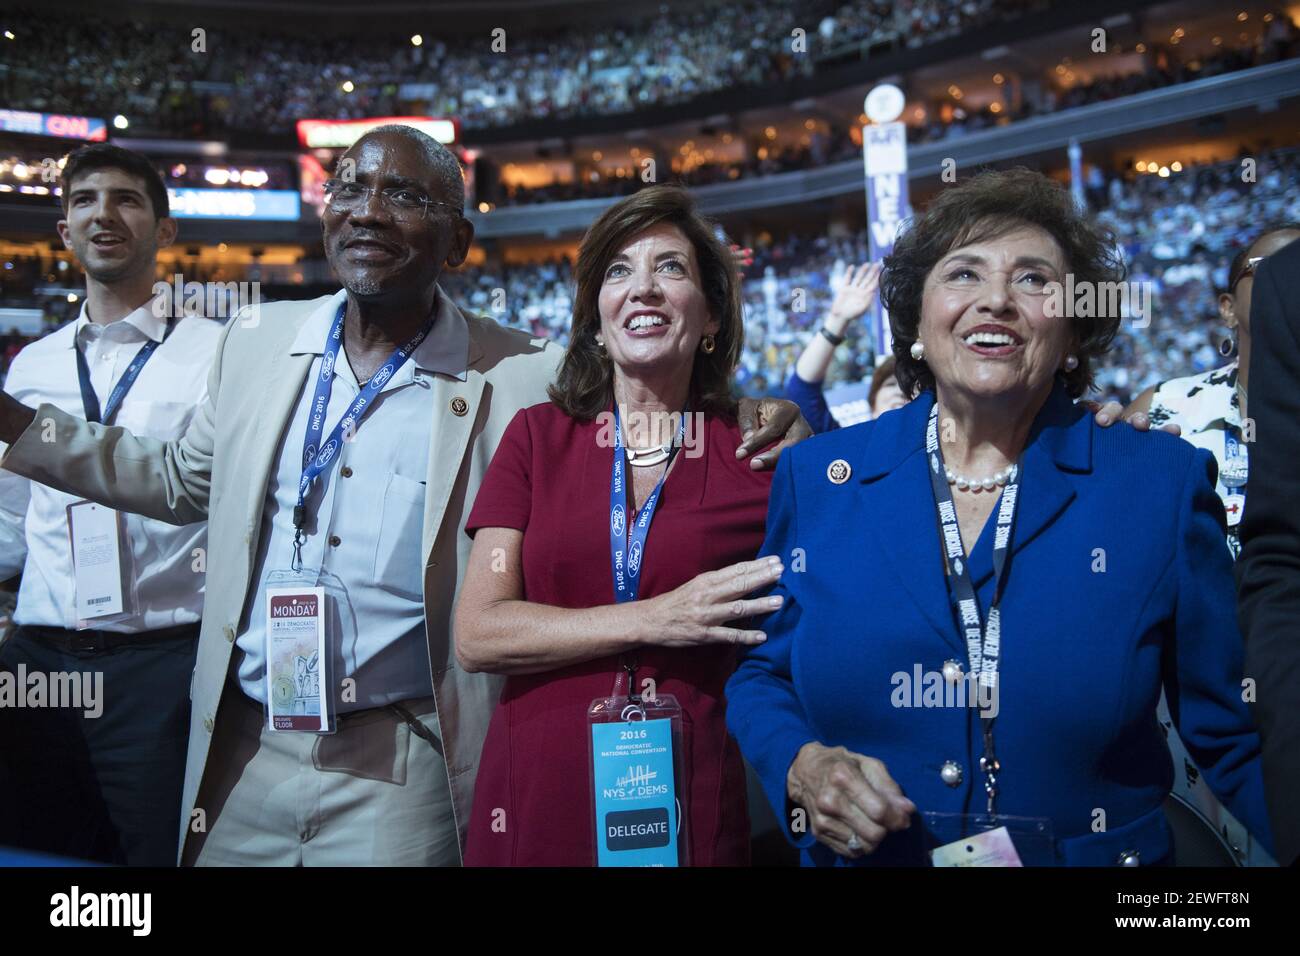 UNITED STATES - JULY 25: From left, Rep. Gregory Meeks, D-N.Y., New York Lt. Gov. Kathy Hochul, and Rep. Nita Lowey, D.N.Y., sing along with Paul Simon on the floor of the Wells Fargo Center in Philadelphia, Pa., on the first day of the Democratic National Convention, July 25, 2016.  Stock Photo